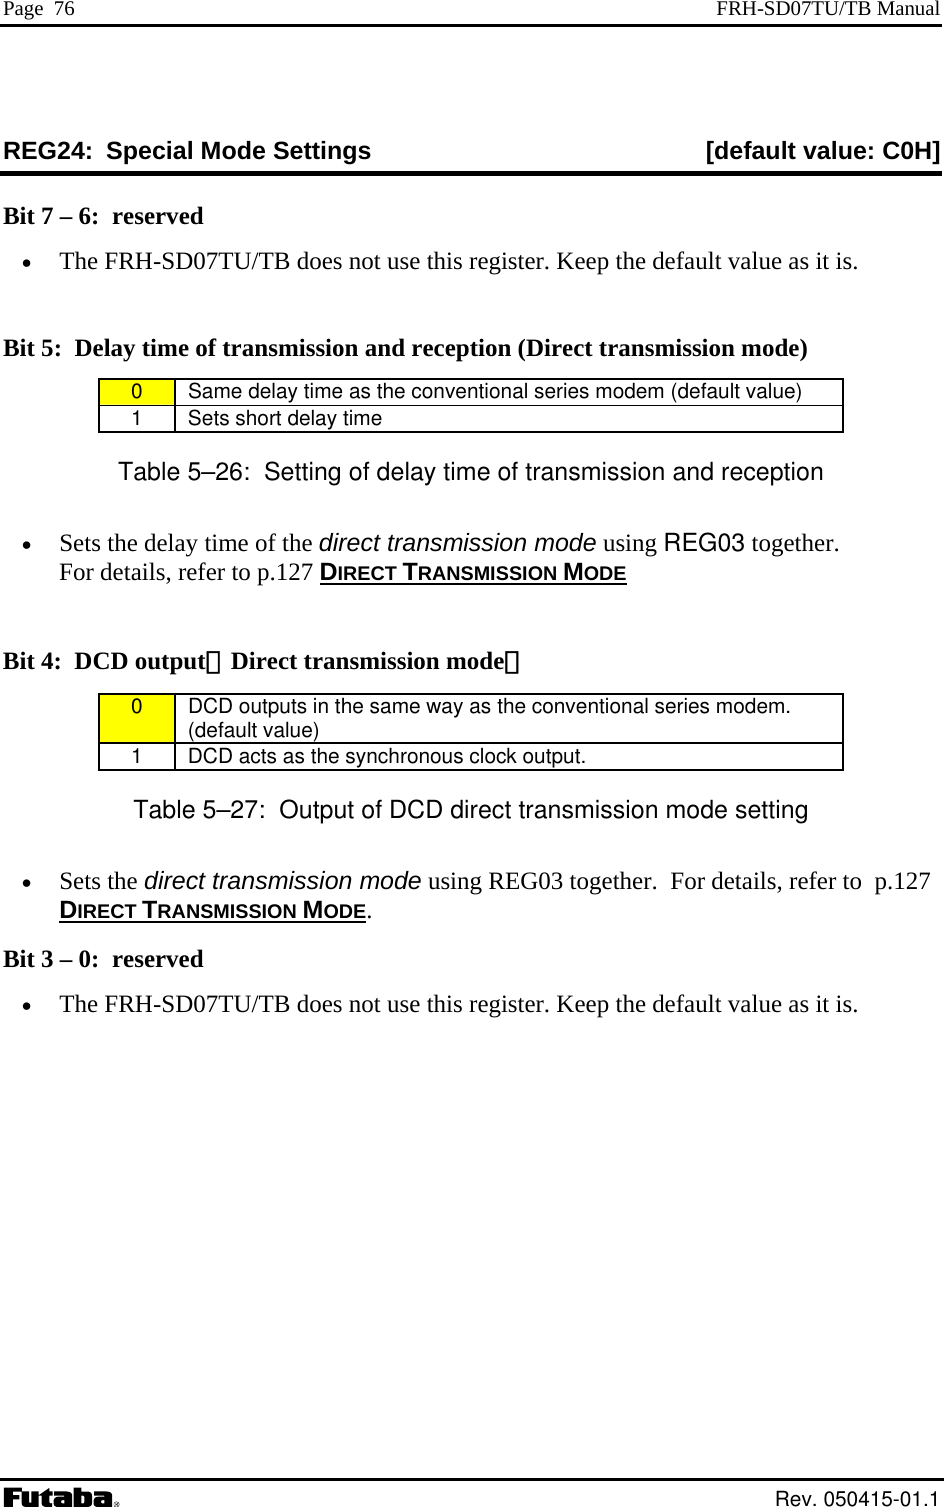 Page  76  FRH-SD07TU/TB Manual REG24:  Sp ia [default value: C0H] ec l Mode Settings Bit 7 – 6:  reserved •  The FRH-SD07TU/TB does not use this regiBit 5:  Delay time of transmission and reception (Direct transmission mode) ster. Keep the default value as it is.  0   Same delay time as the conventional series modem (default value) 1   Sets short delay time Table 5–26:  Setting of delay time of transmission and reception  • ils, refer to p.127 Sets the delay time of the direct transmission mode using REG03 together. For deta DIRECT TRANSMISSION MODE ）  Bit 4:  DCD output（Direct transmission mode0   DCD outputs in the same way as the conventional series modem. (default value) 1   DCD acts as the synchronous clock output. Tabl ing p.127 e 5–27:  Output of DCD direct transmission mode sett•  Sets the direct transmission mode using REG03 together.  For details, refer to  DIRECT TRANSMISSION MODE. B 3• it   – 0:  reserved The FRH-SD07TU/TB does not use this register. Keep the default value as it is.  Rev. 050415-01.1 